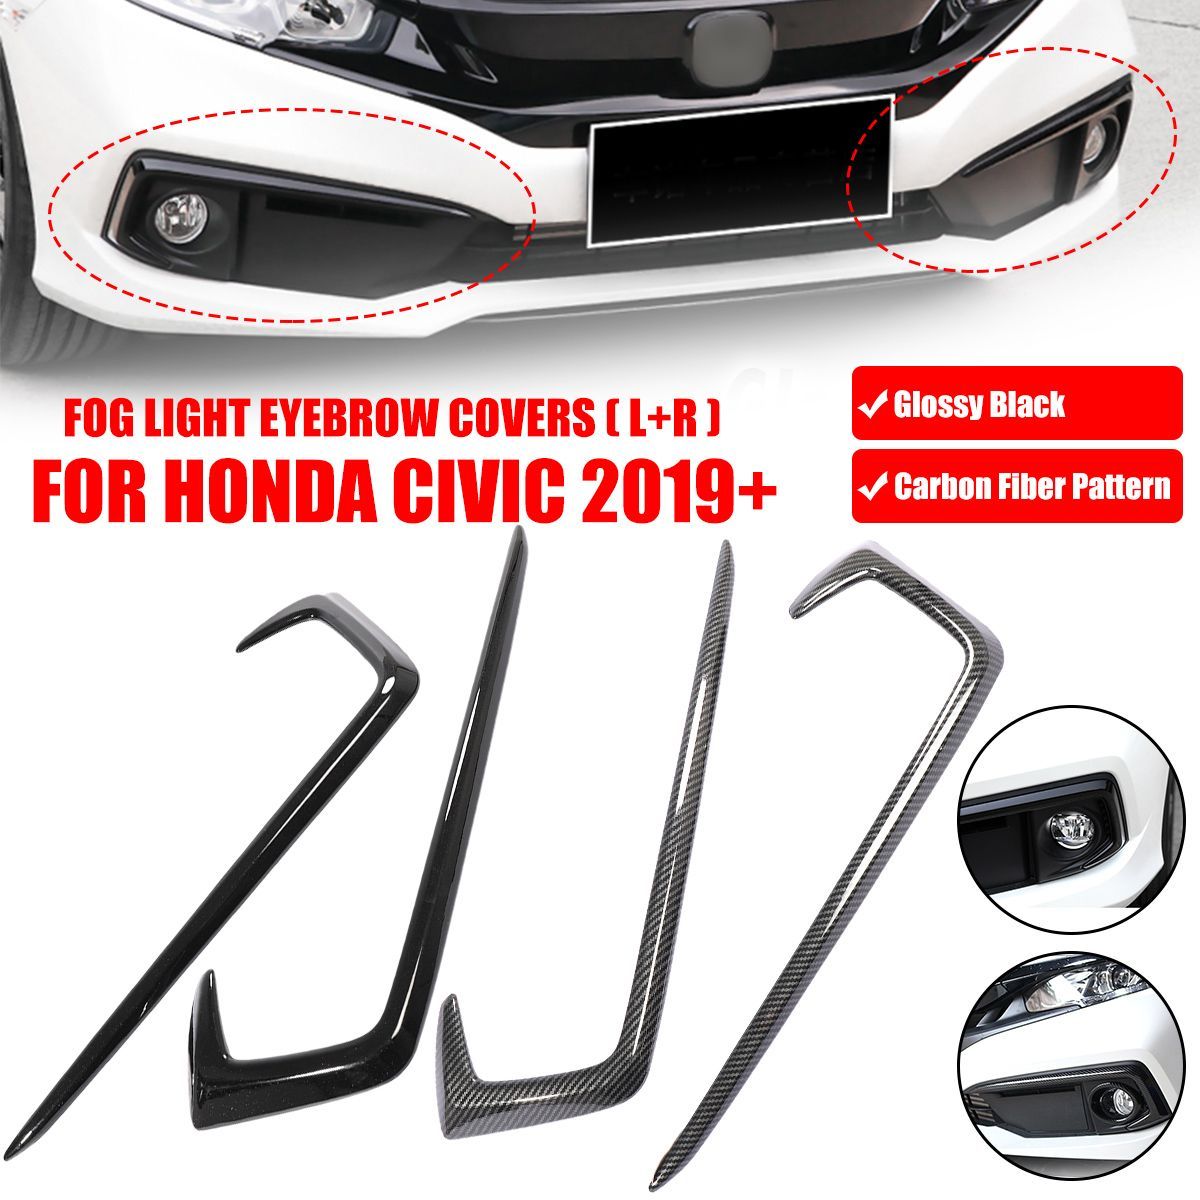 Glossy-Black-Style-Front-Fog-Light-Eyebrow-Cover-Trim-For-Honda-Civic-2019-Up-1631084